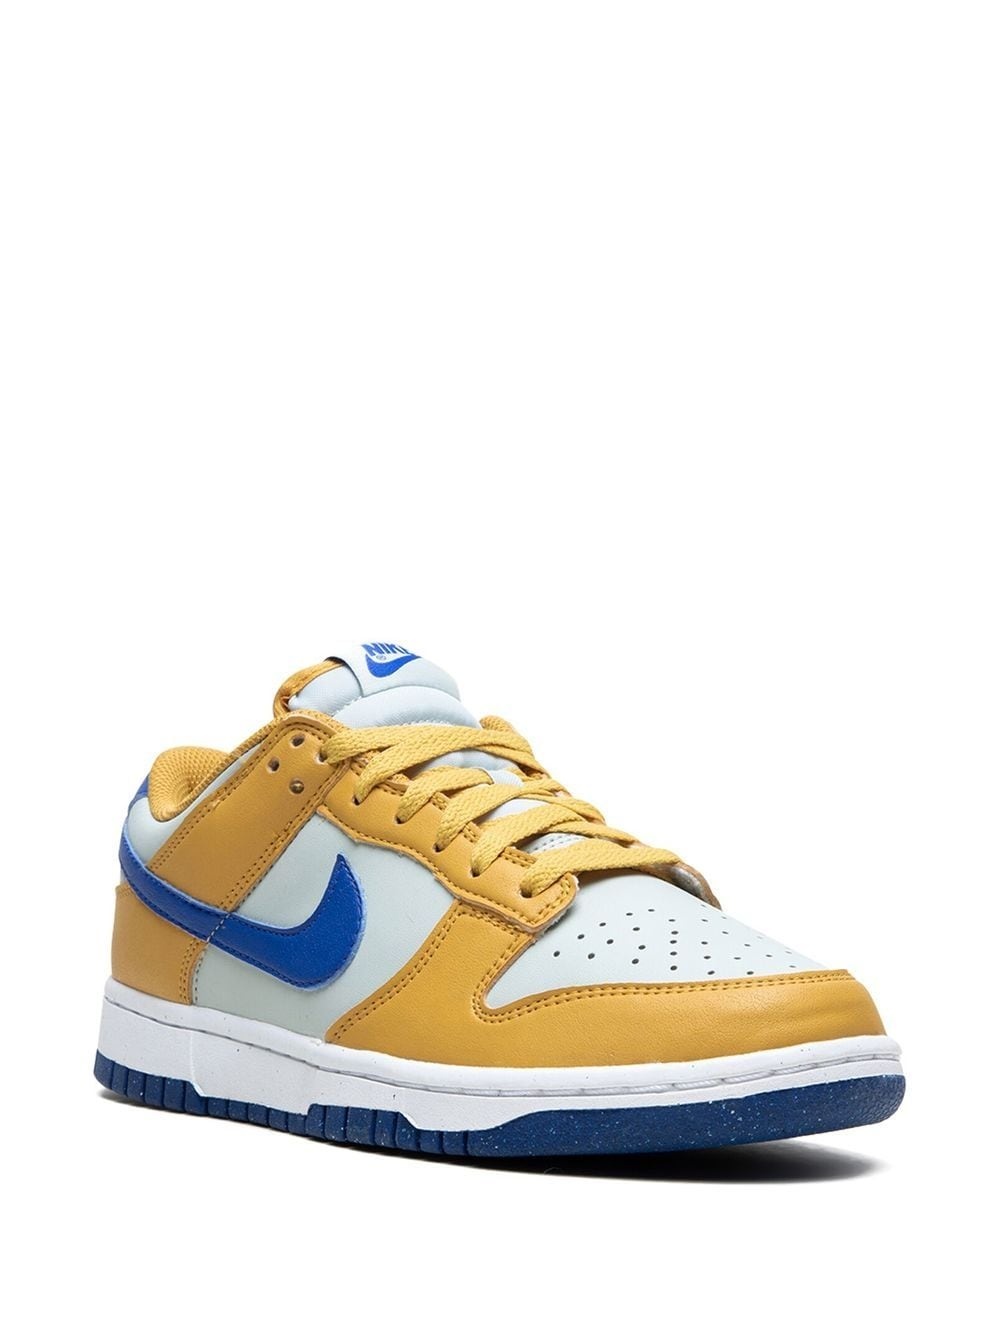 Dunk Low Next Nature "Wheat Gold Royal" sneakers - 2